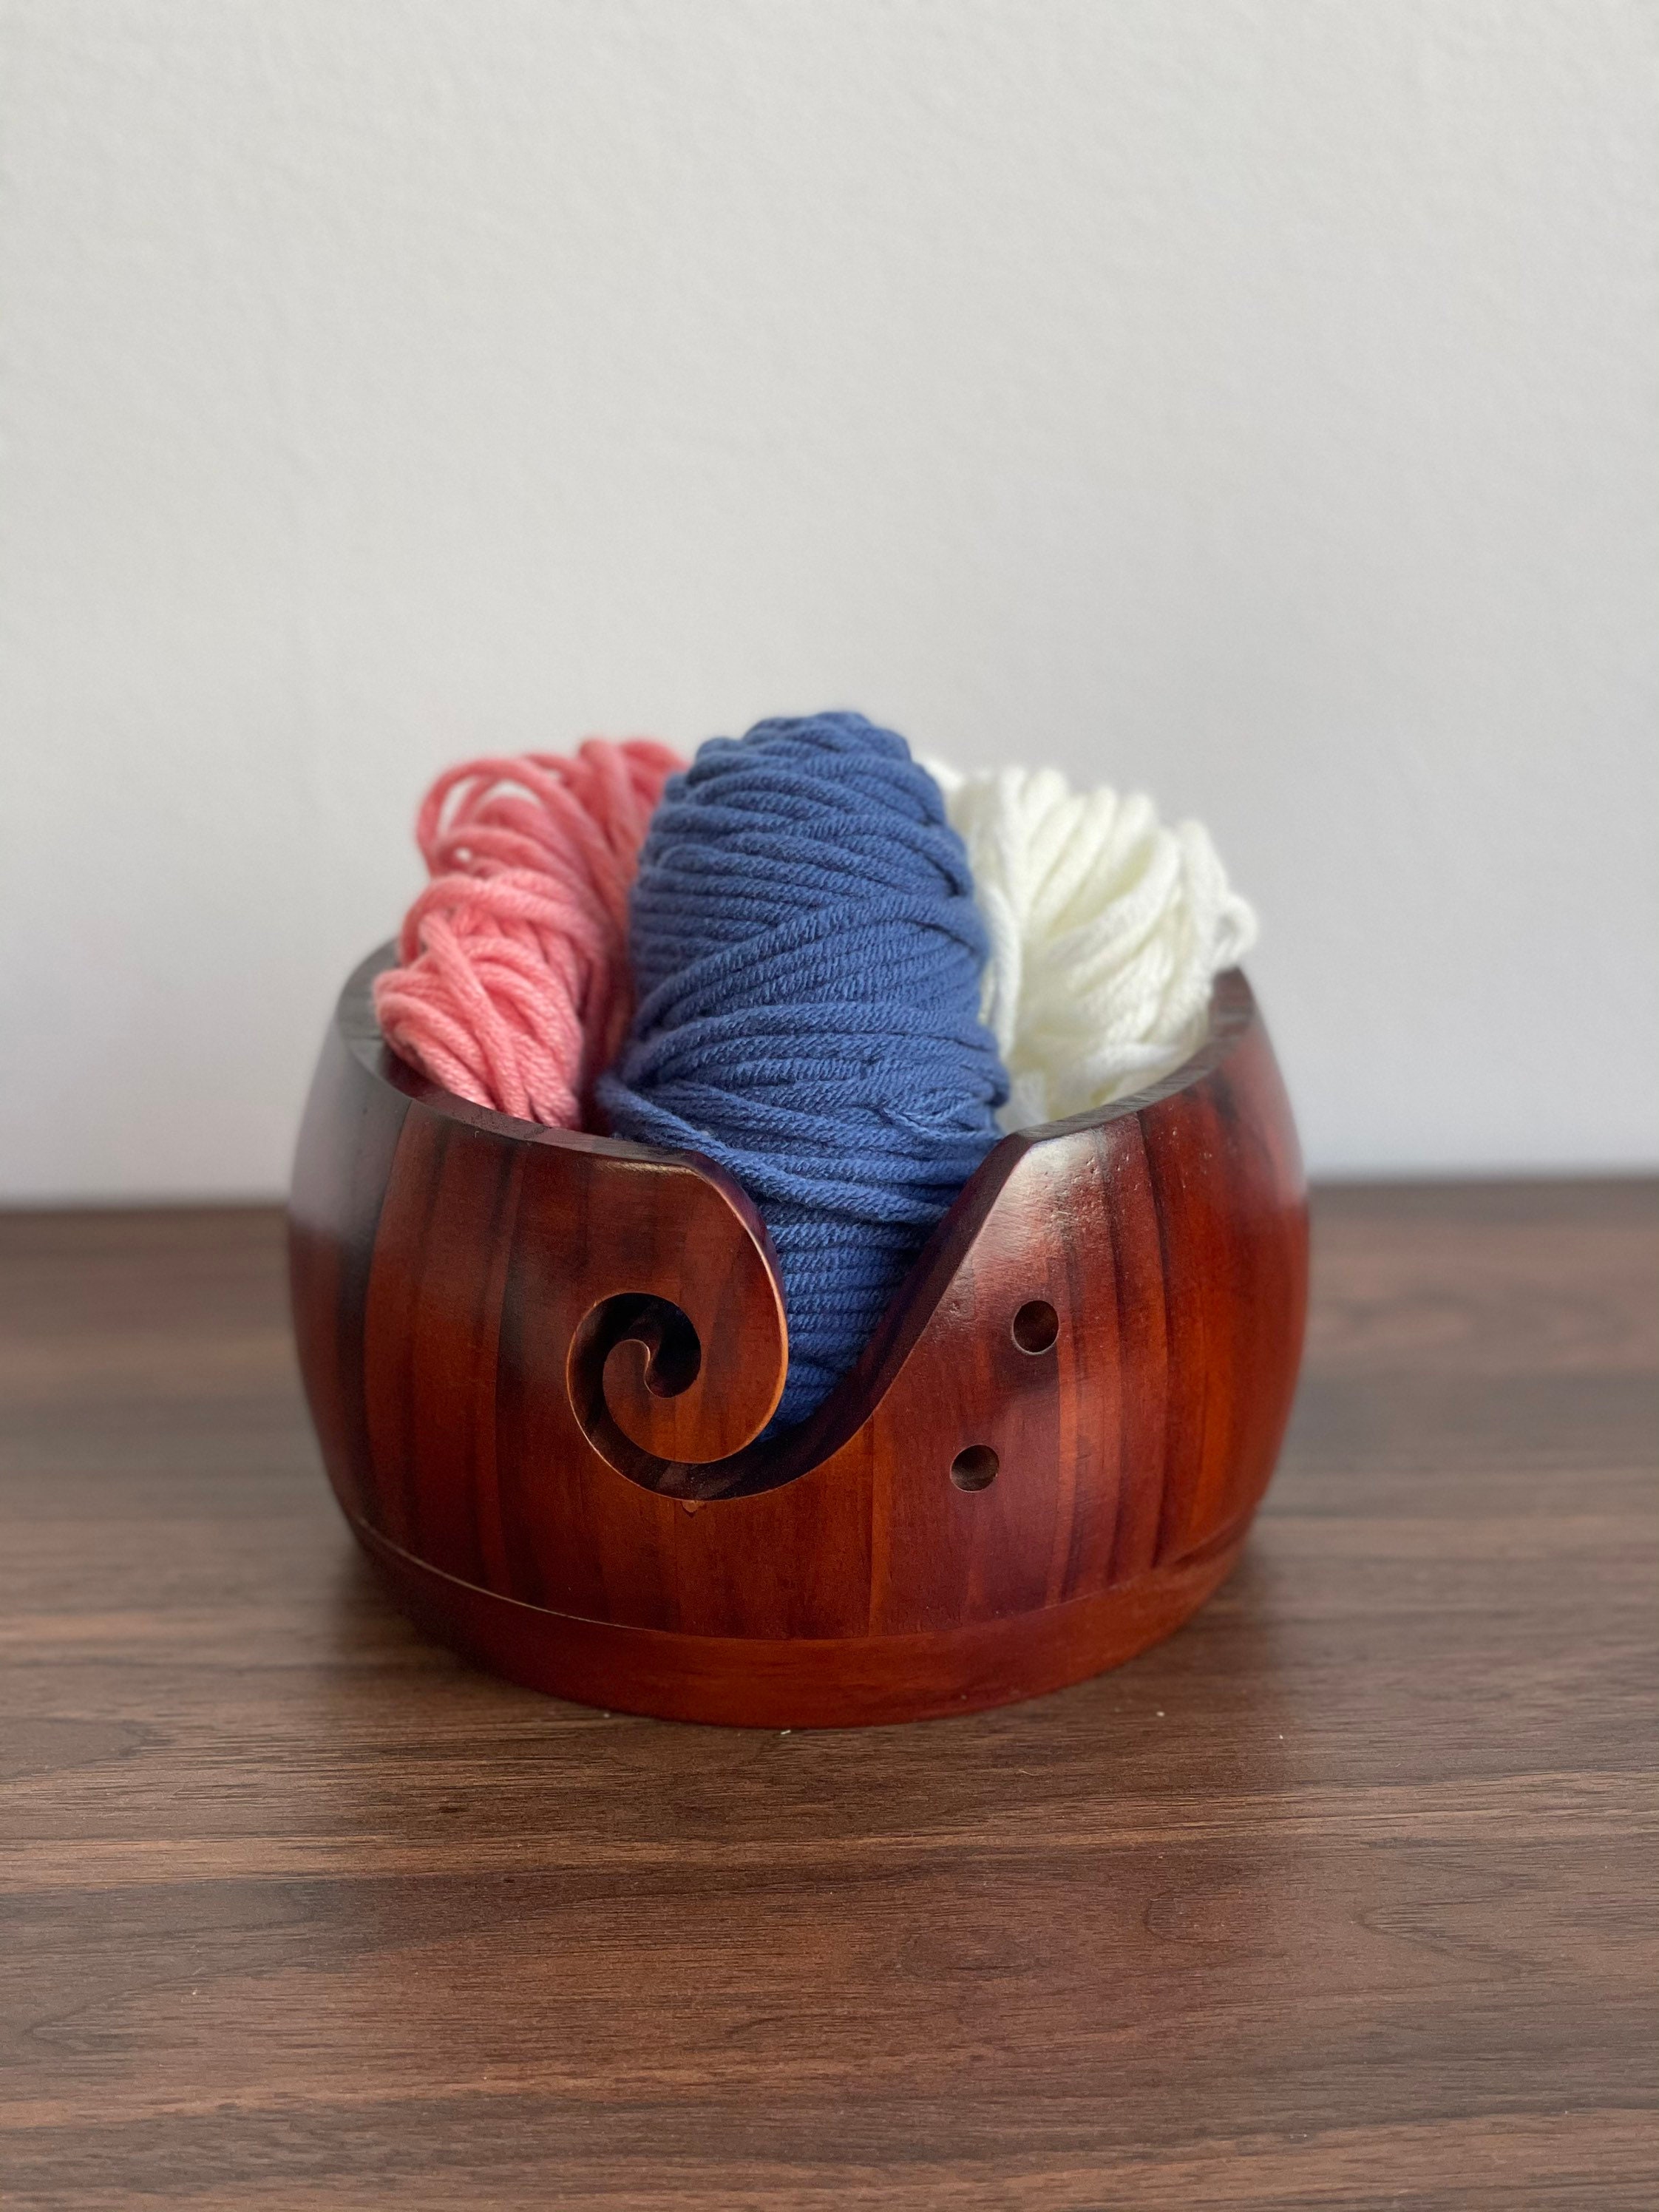 Yarn Knitting Bowl, Large Wooden Wool Bowl, Large Yarn Bowls For Crochet  And Knitting Projects, Yarn Holder, Wool Ball Holder, Protect Wool And  Preven